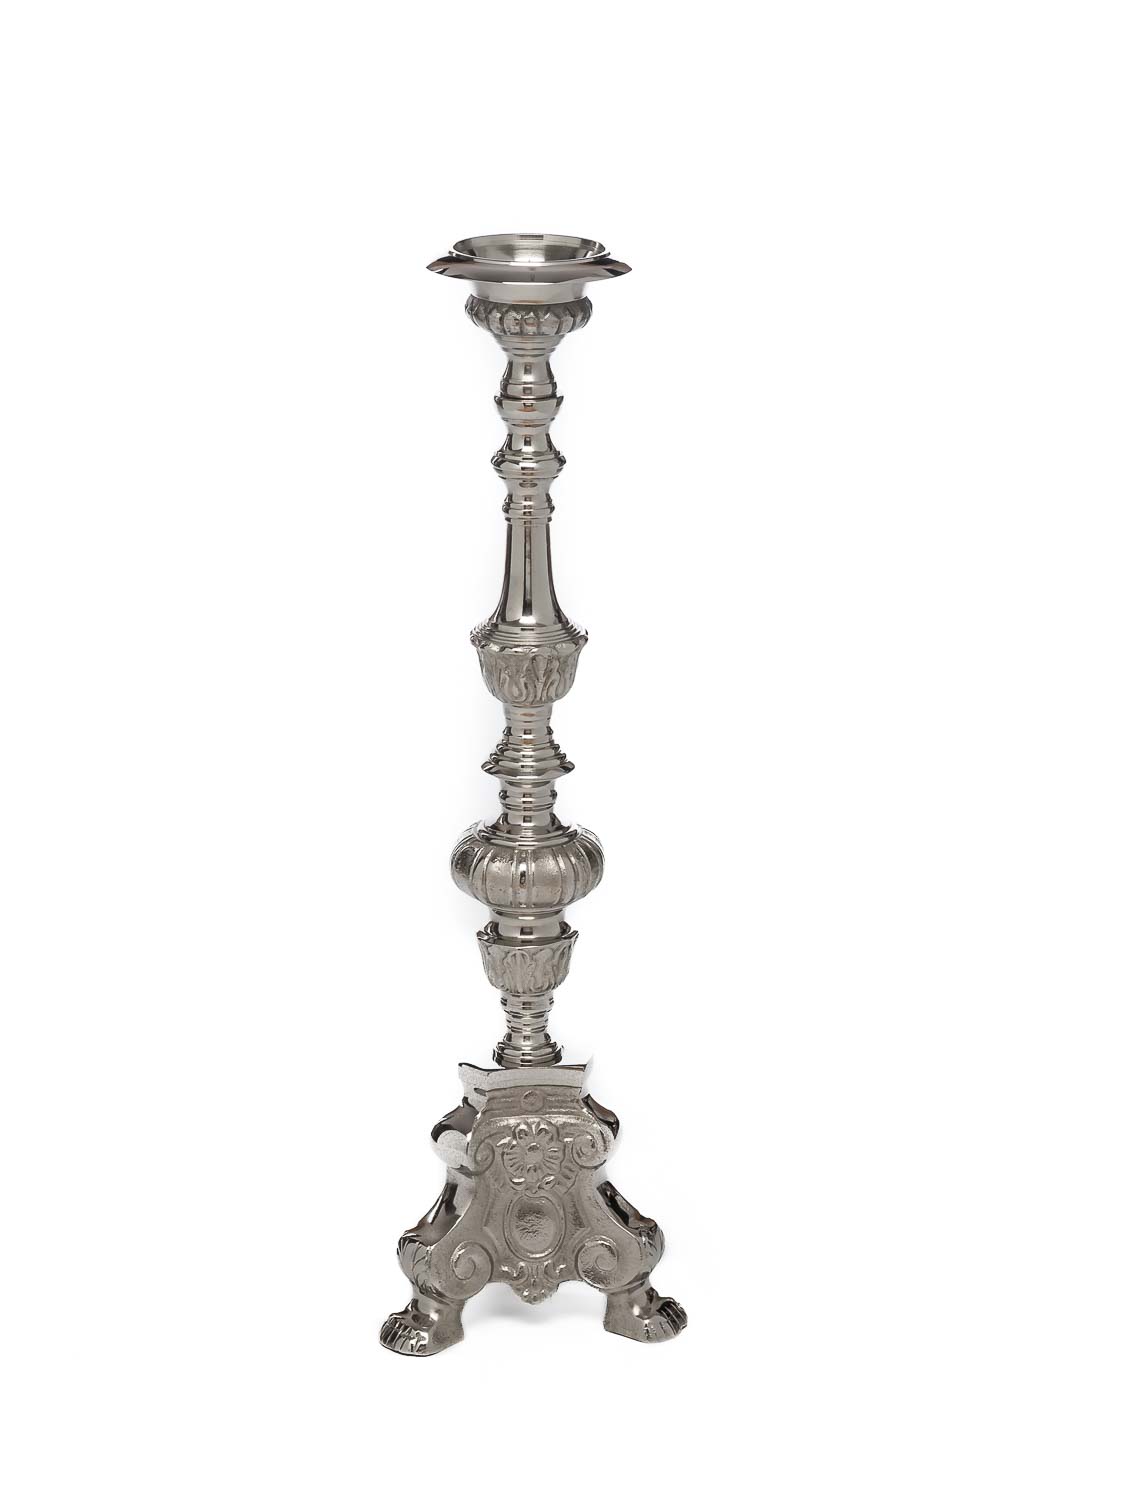 Candlestick holder church altar candle antique style silver large 65cm